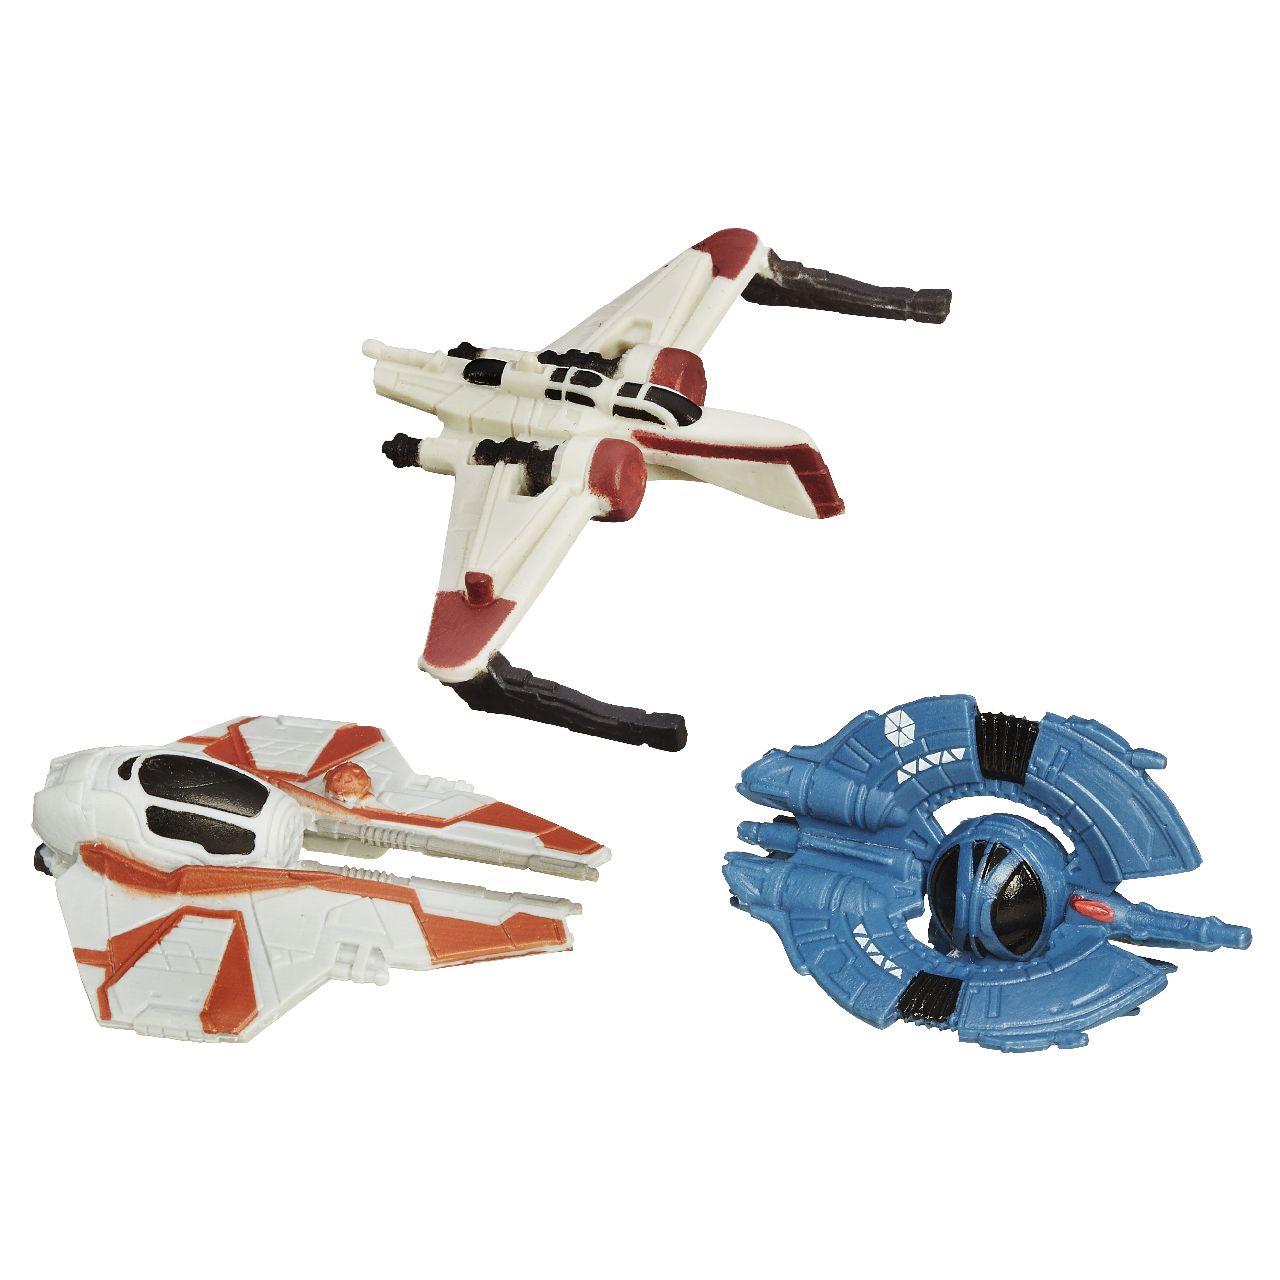 Star Wars: The Force Awakens Toys